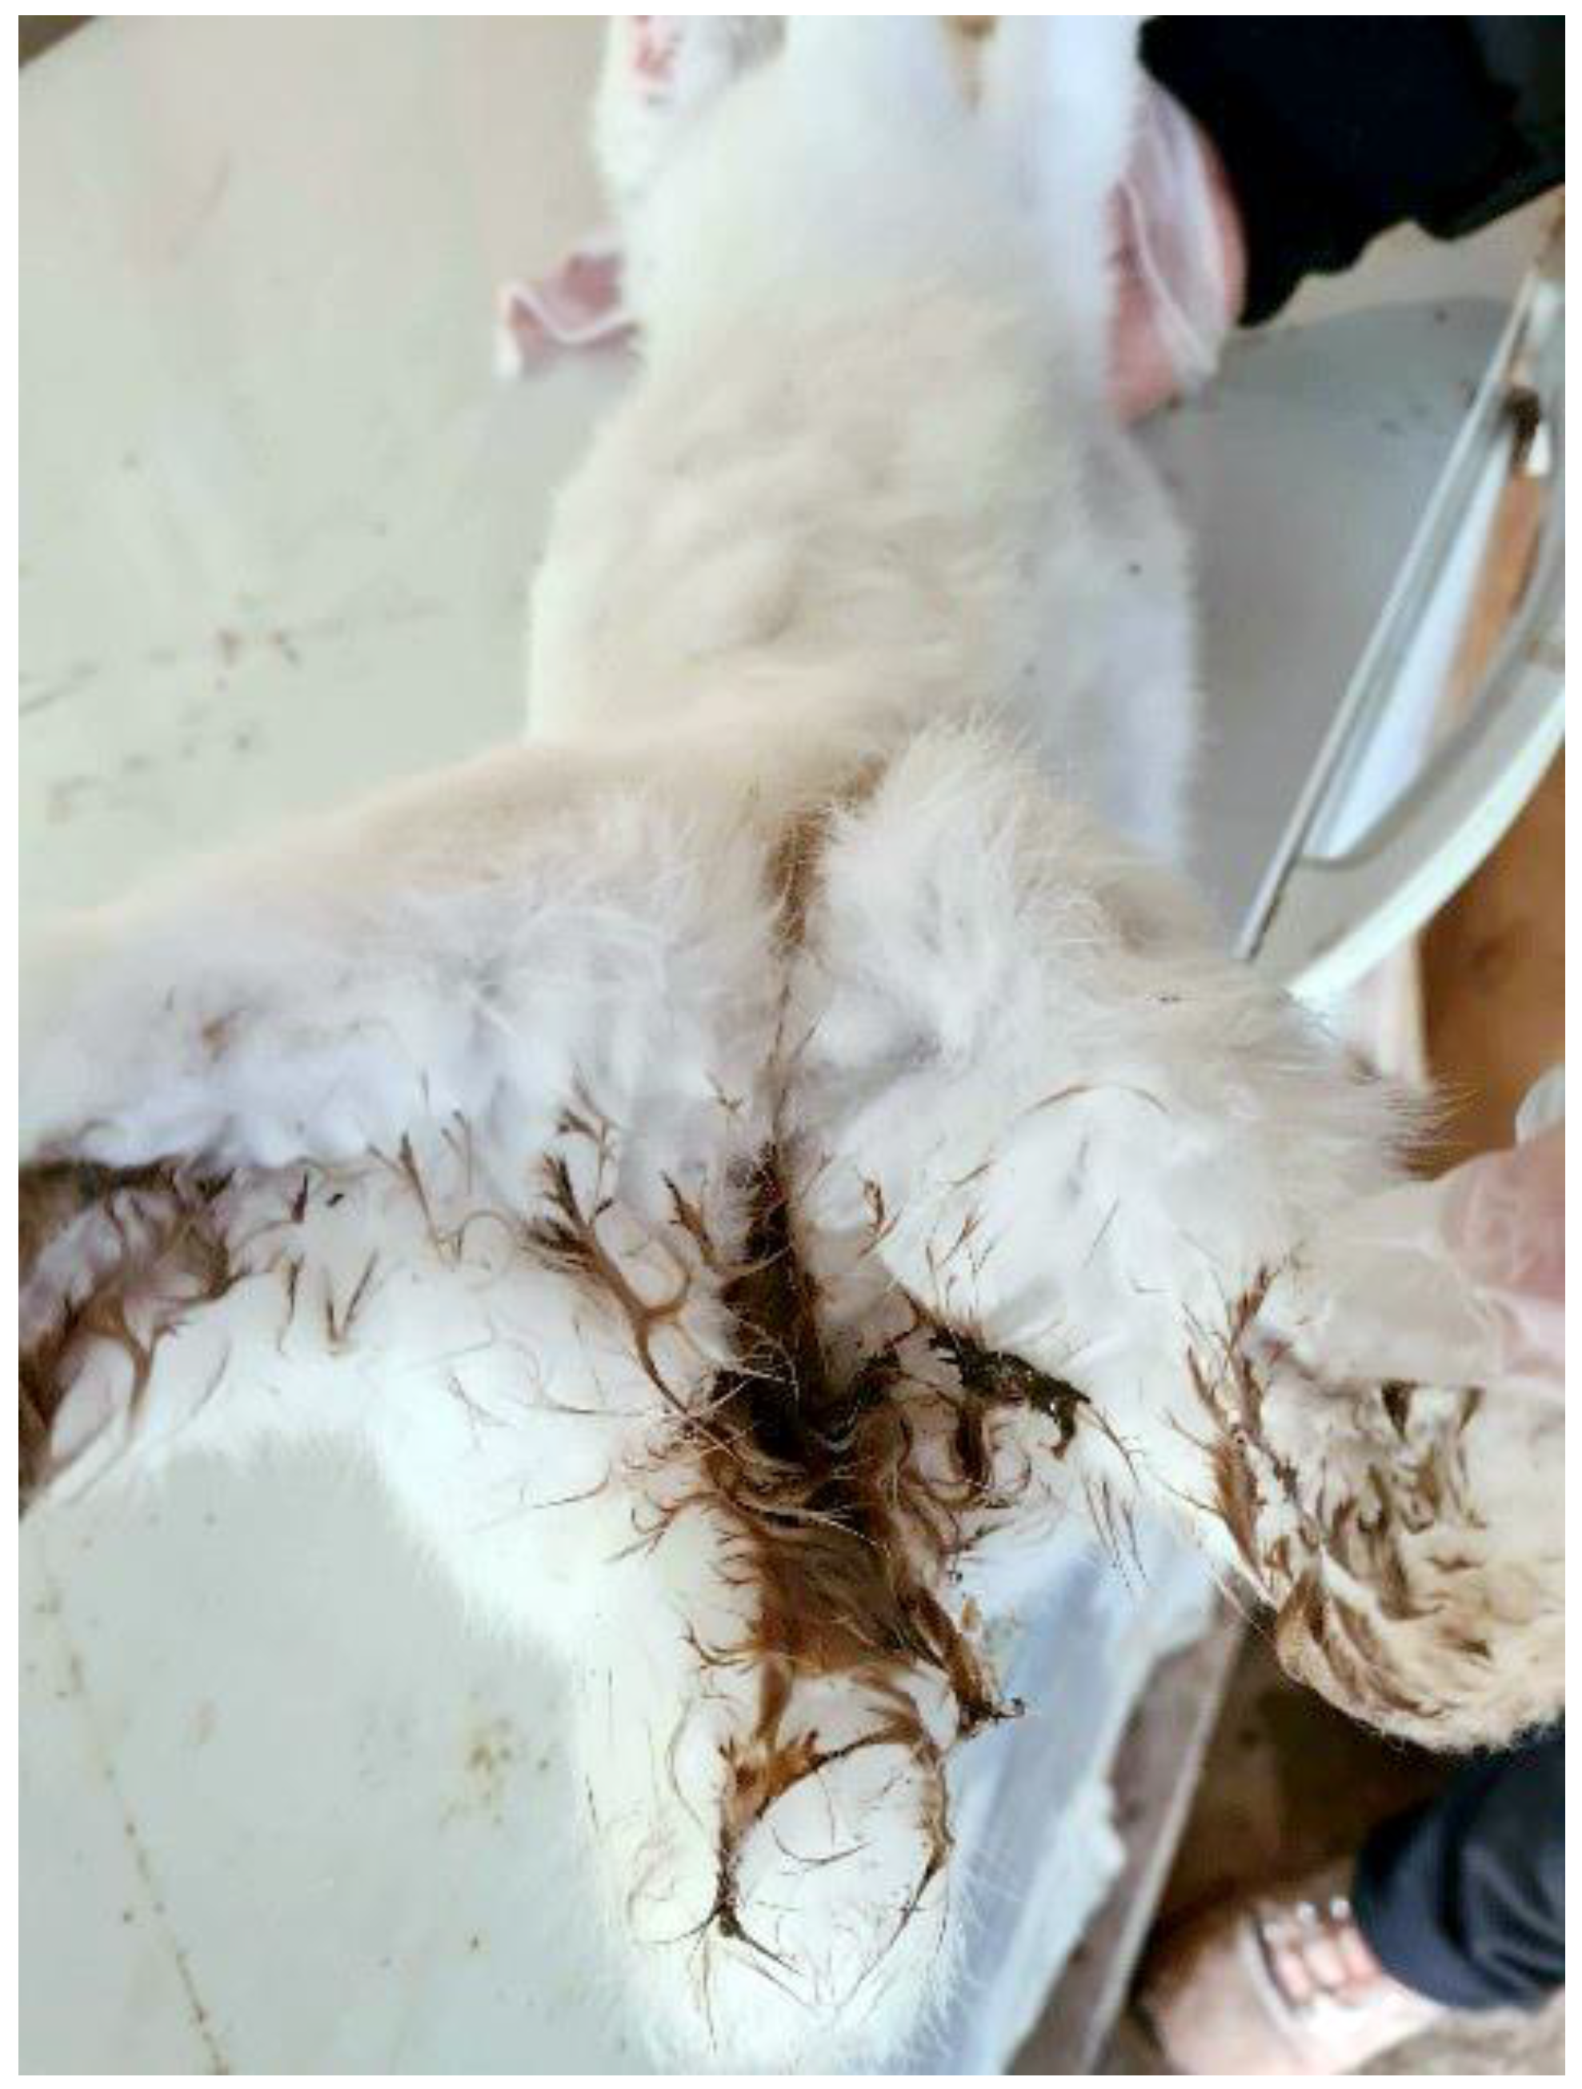 Pathogens | Free Full-Text | Deaths Due to Mixed Infections with Passalurus  ambiguus, Eimeria spp. and Cyniclomyces guttulatus in an Industrial Rabbit  Farm in Greece